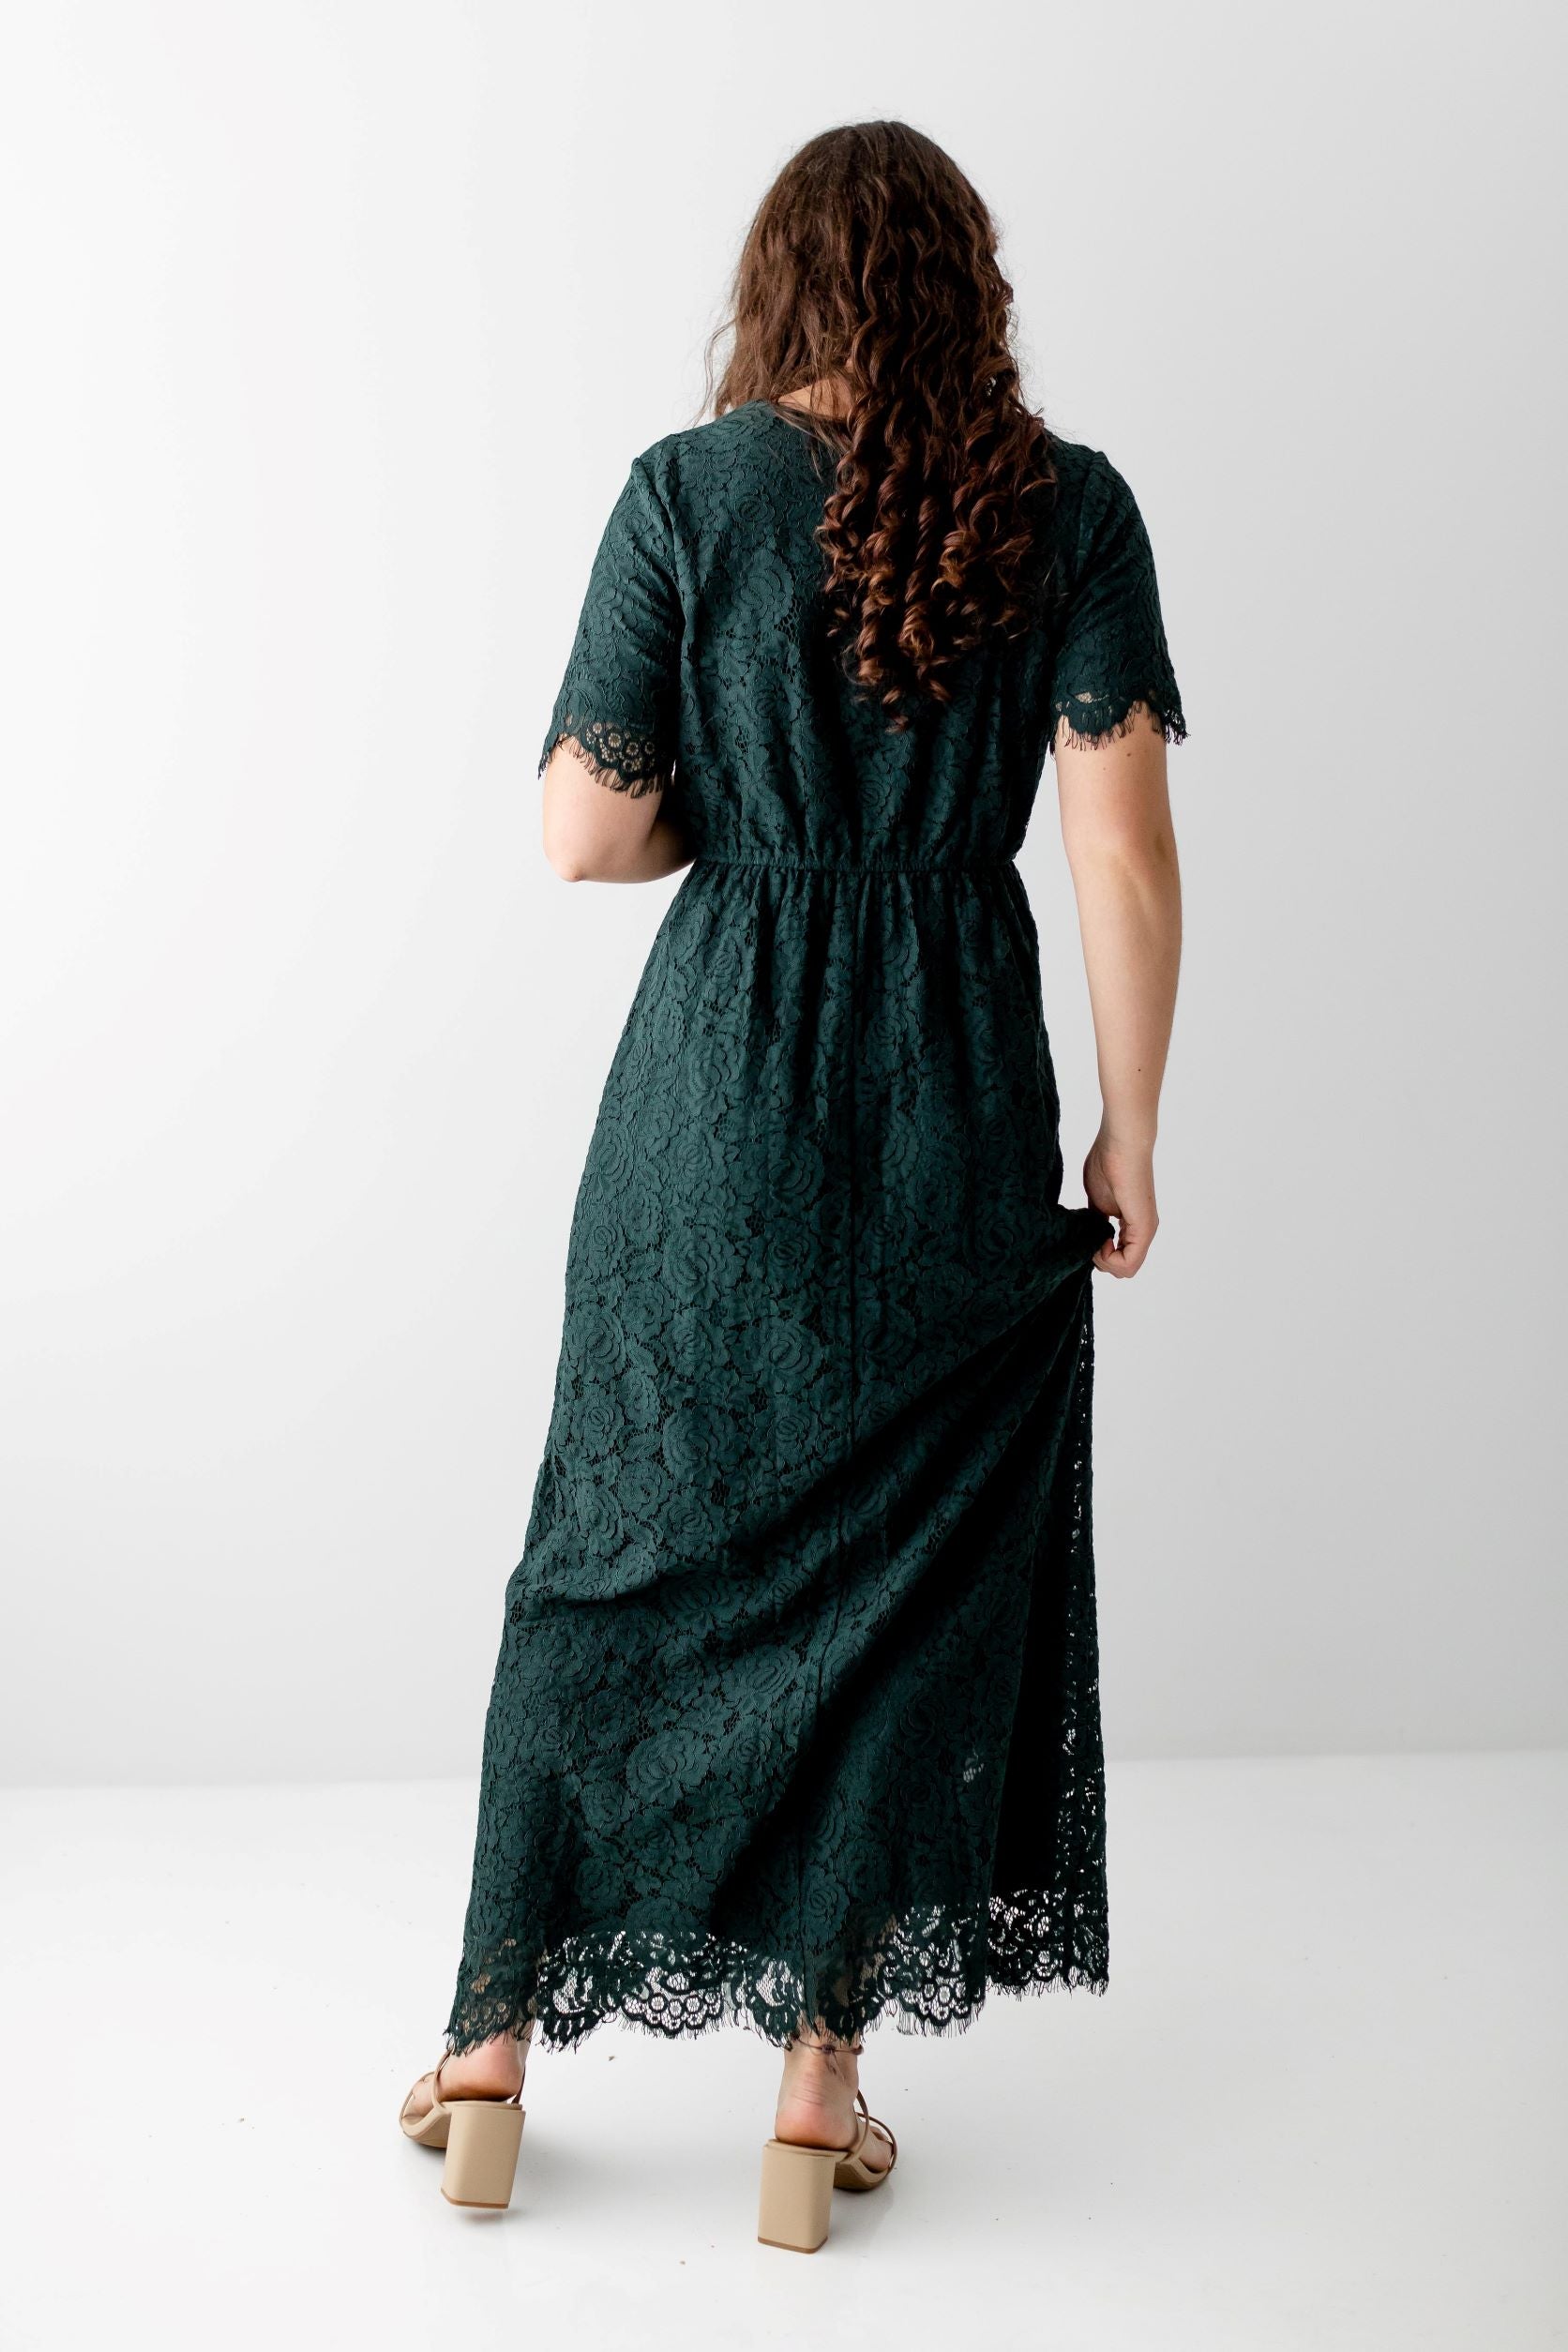 Odessa' Lace Maxi Dress in Forest Green